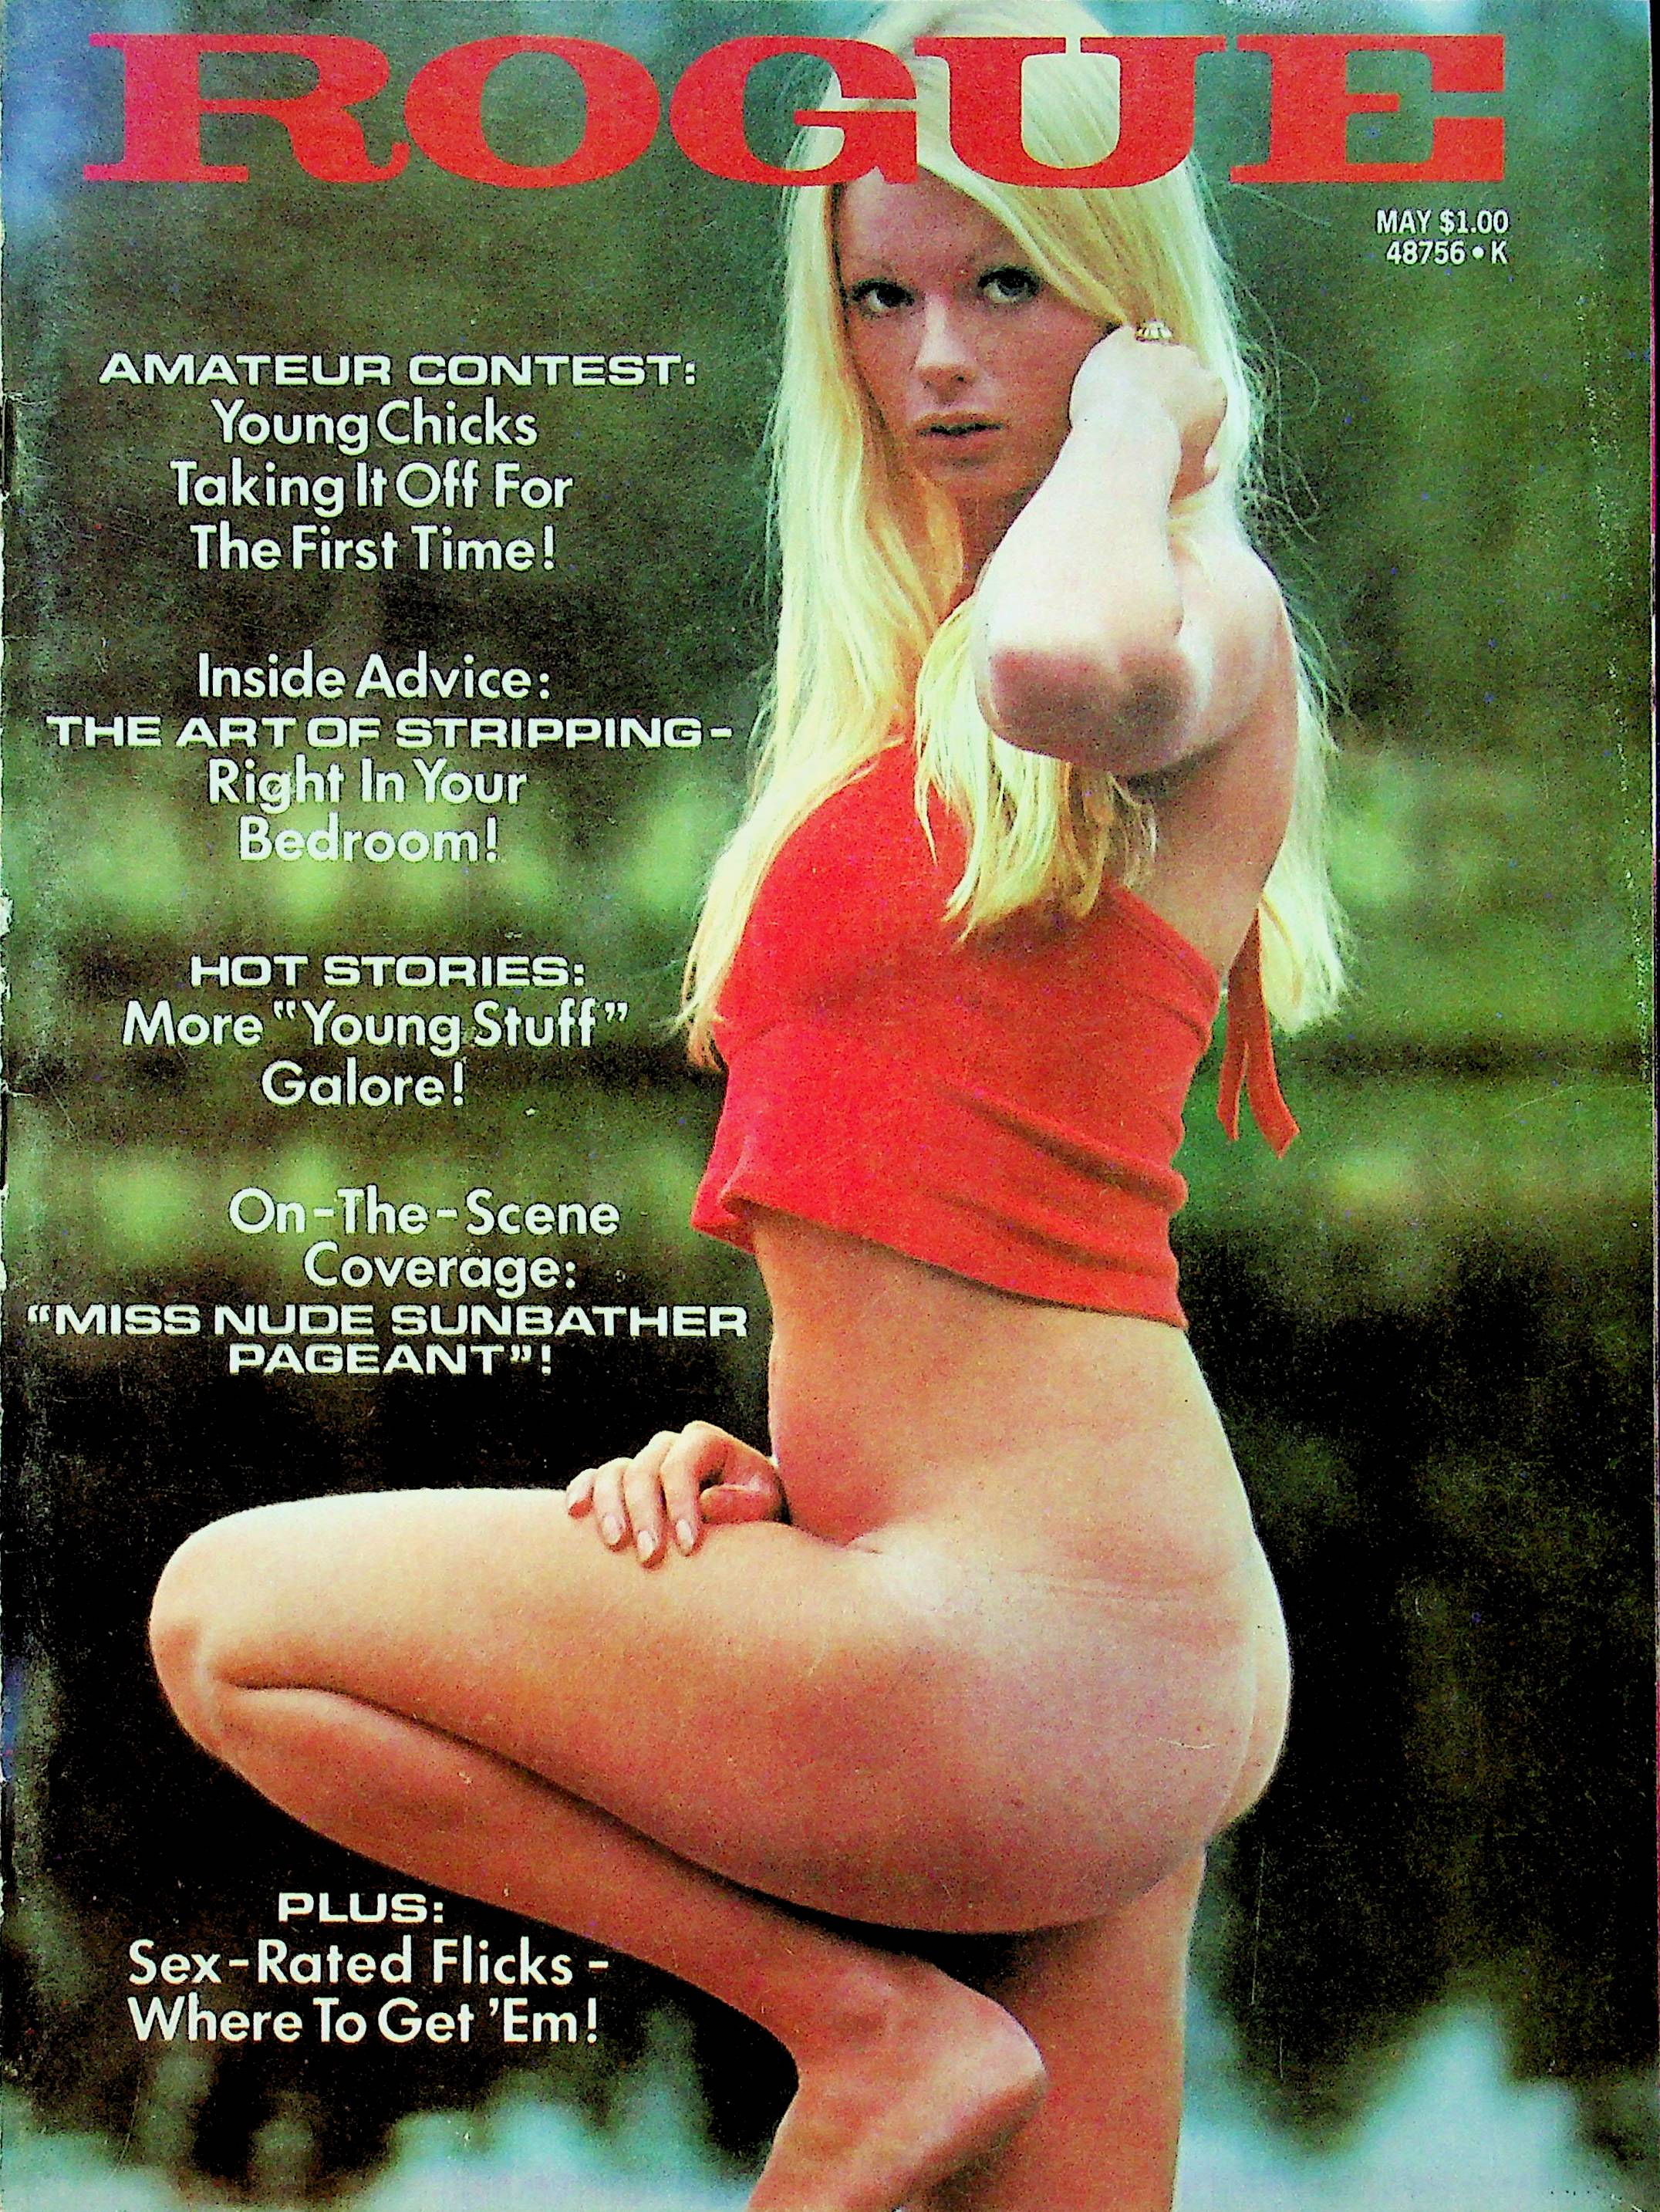 Rogue Adult Magazine Miss Nude Sunbather Pageant Bunny and Bev May 1973 image pic